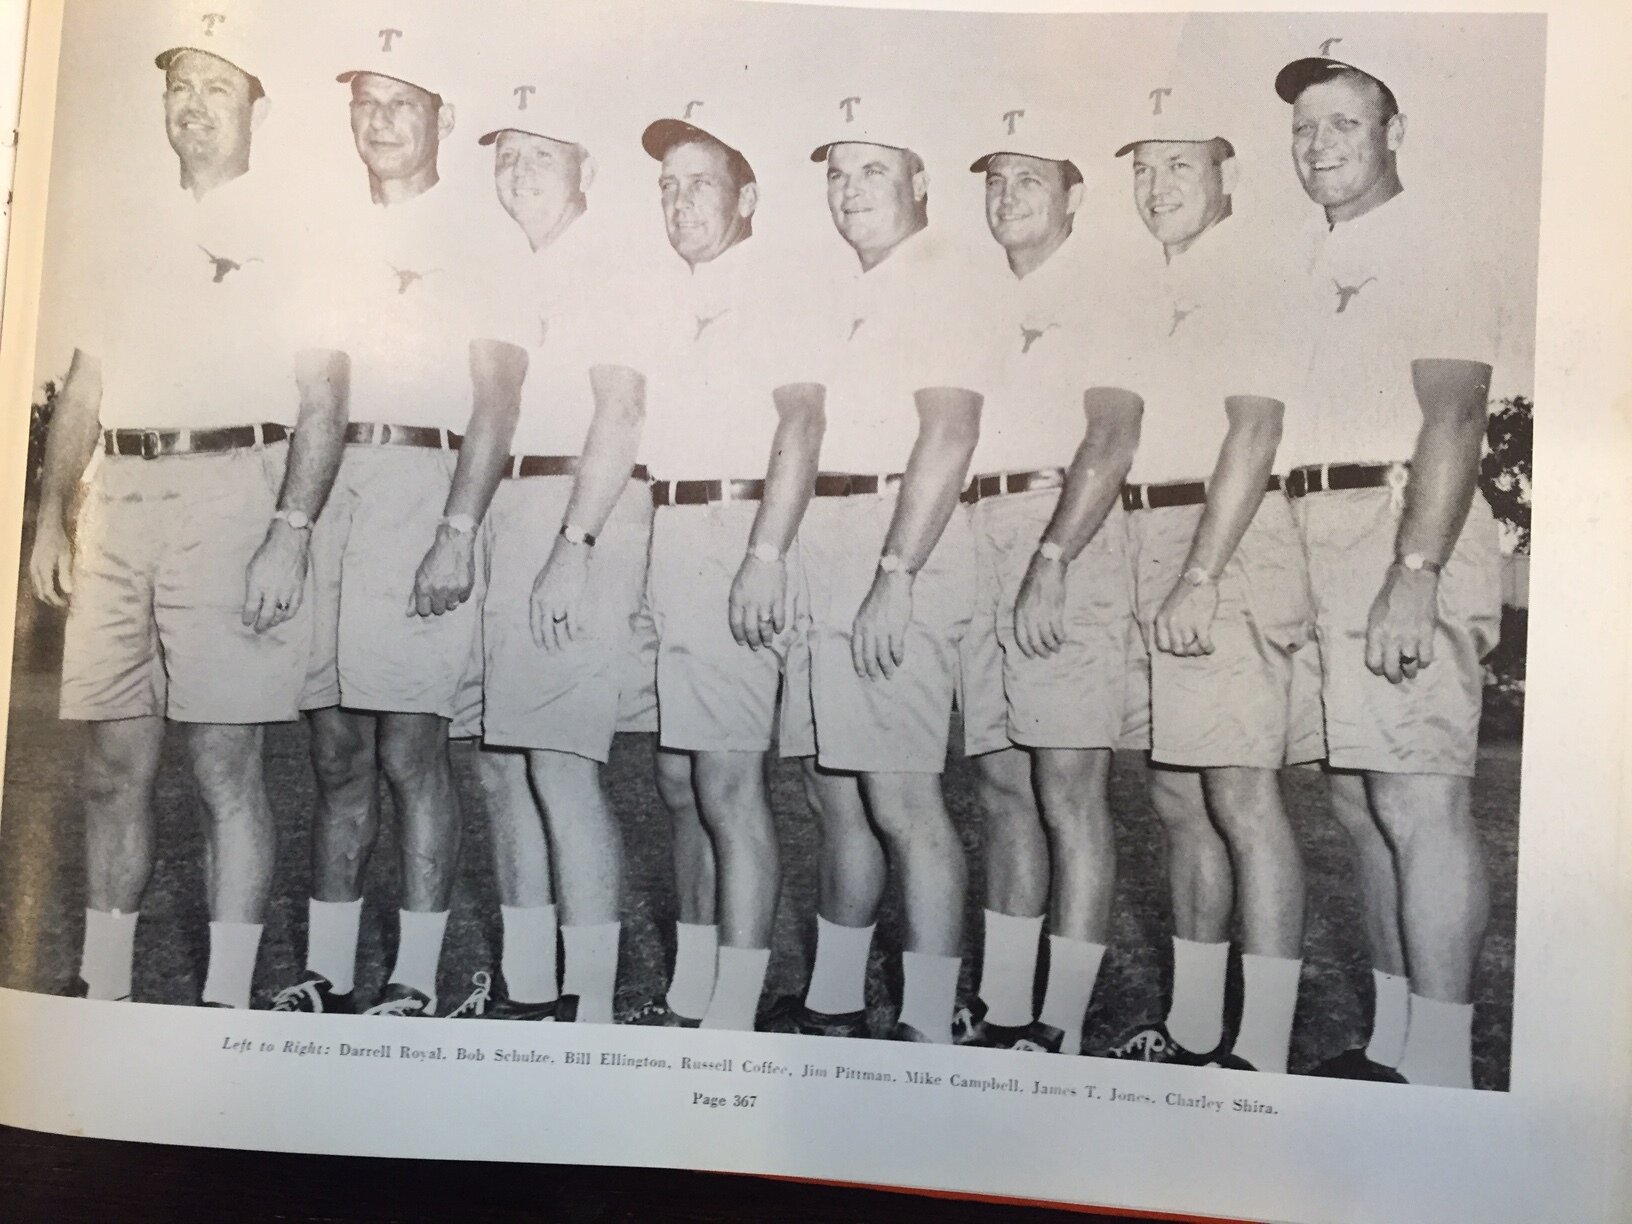 Coach Ellington 3rd from the left and Coffee is 4th from the left.